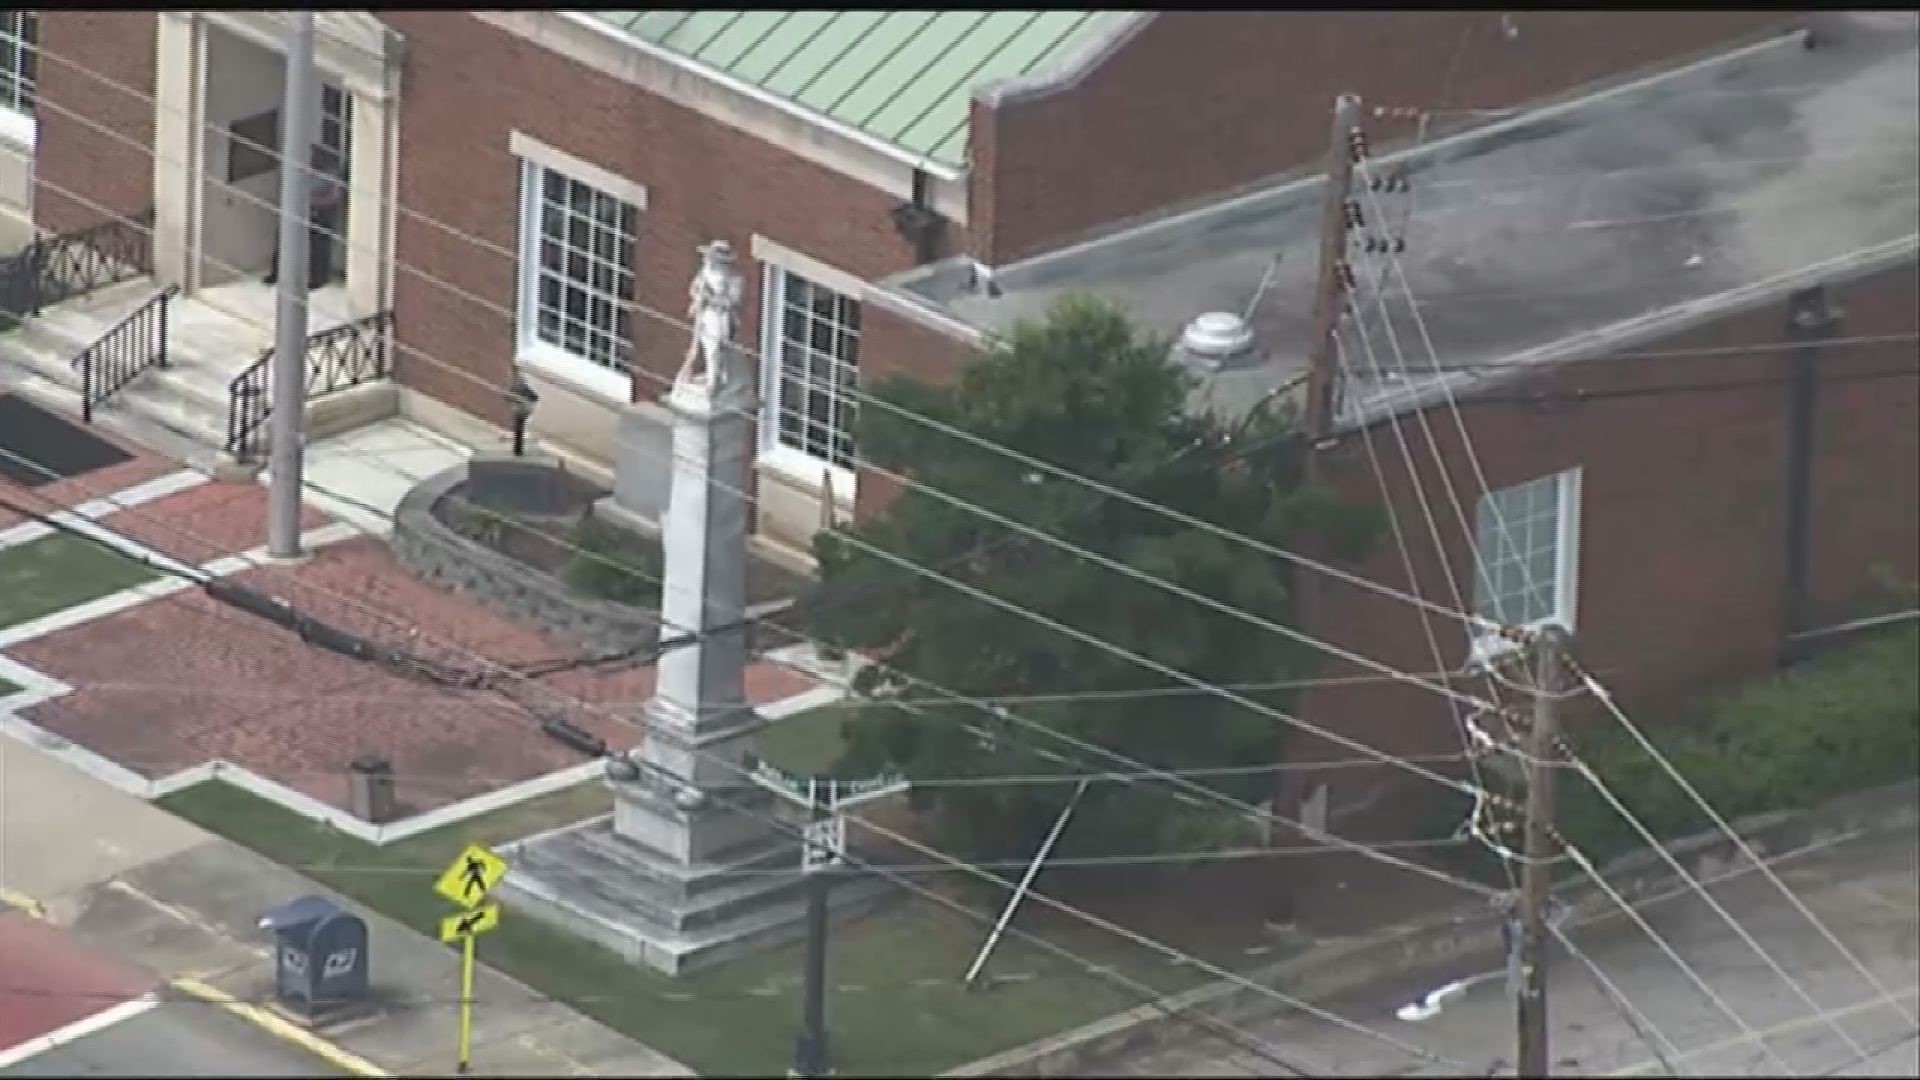 The statue has stood fore 107 years in front of the courthouse. It's being removed.